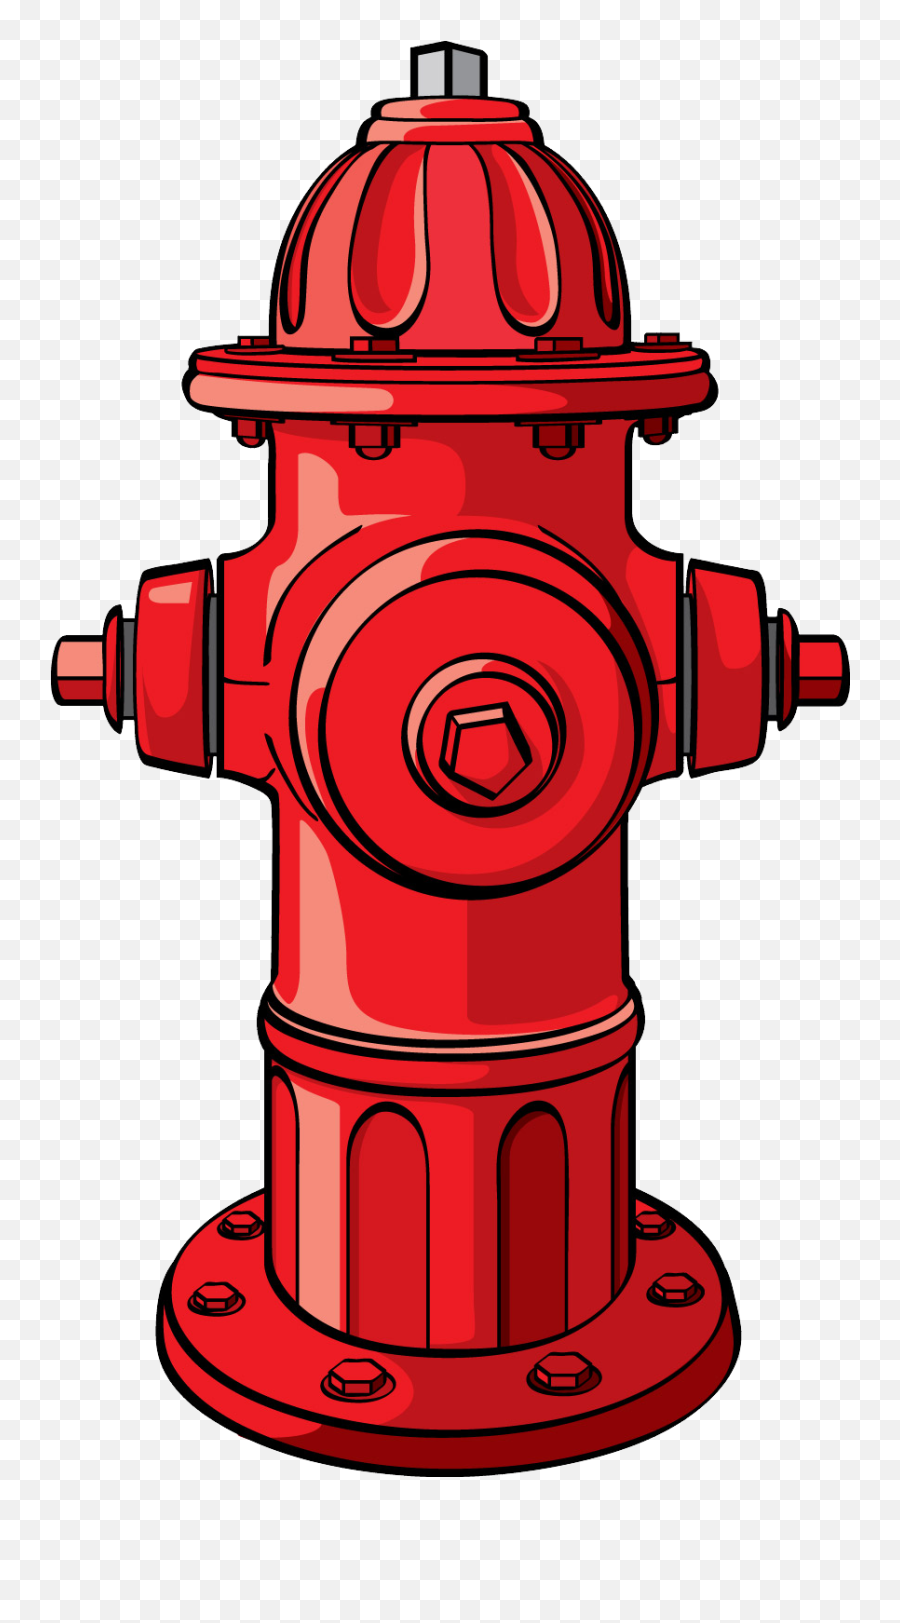 Fire Hydrant Clipart Free - Transparent Fire Hydrant Clipart Emoji,Fire Hydrant Clipart